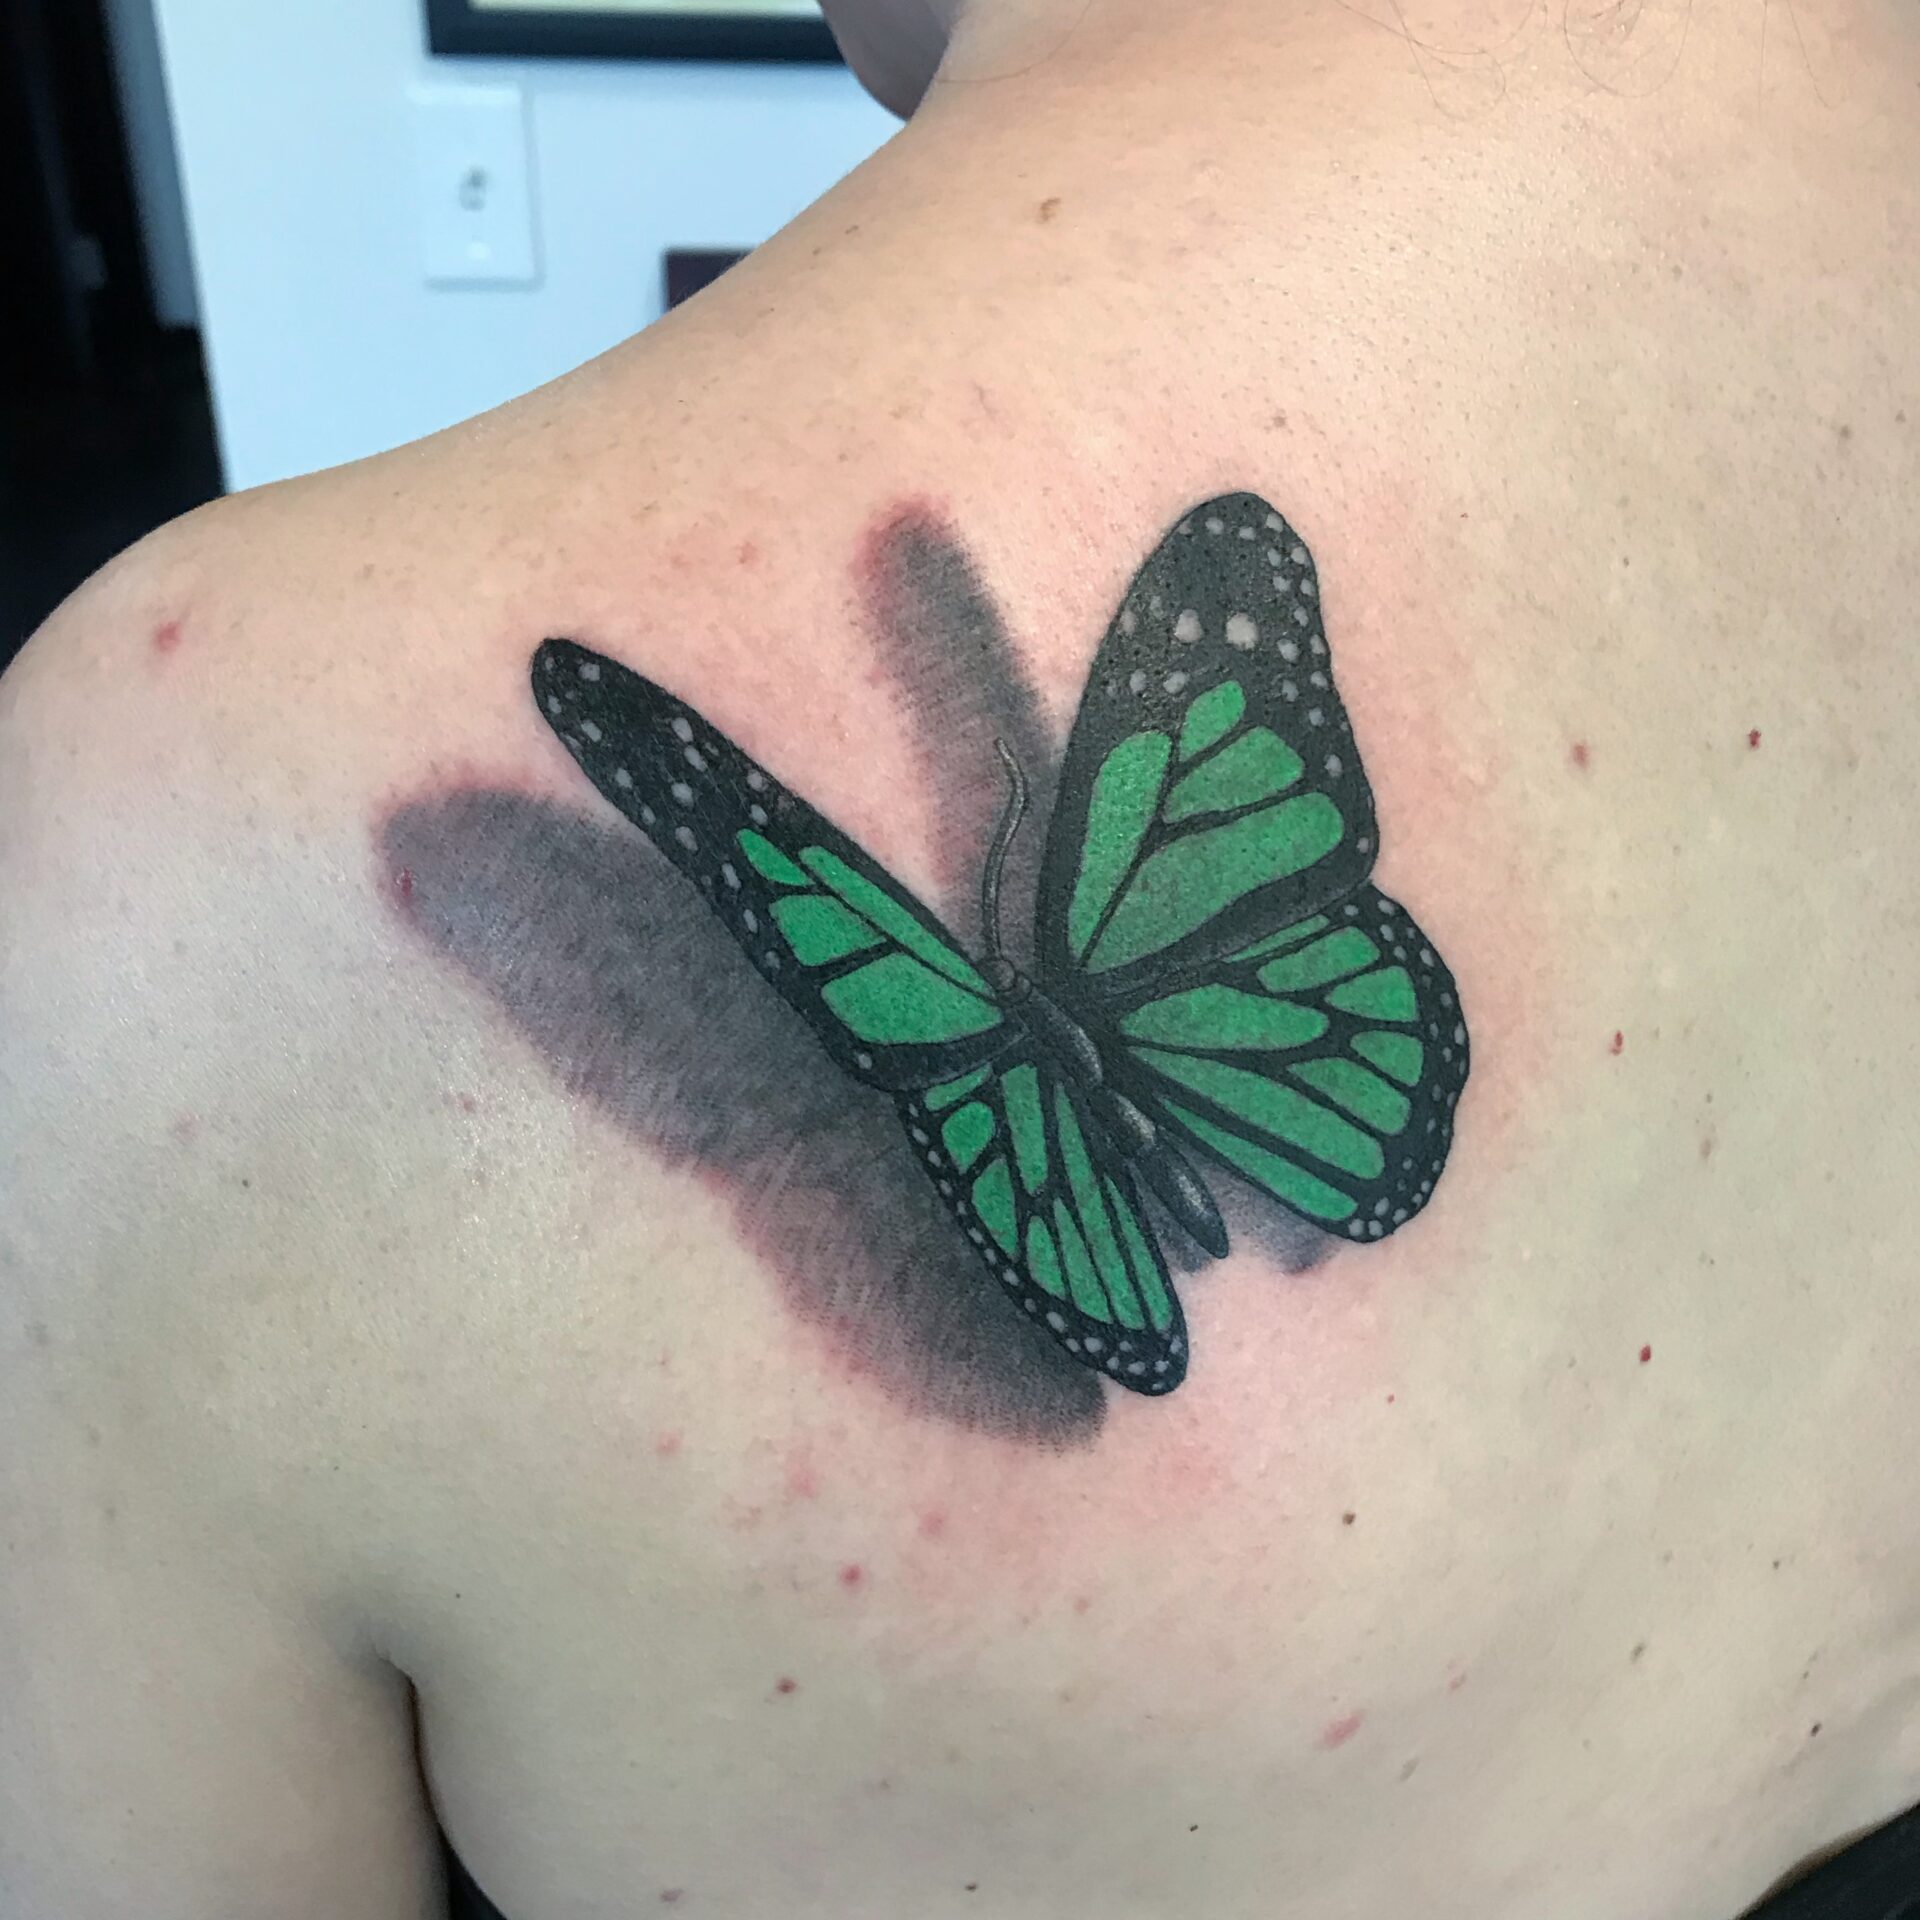 A green butterfly tattoo on the back of someone 's shoulder.